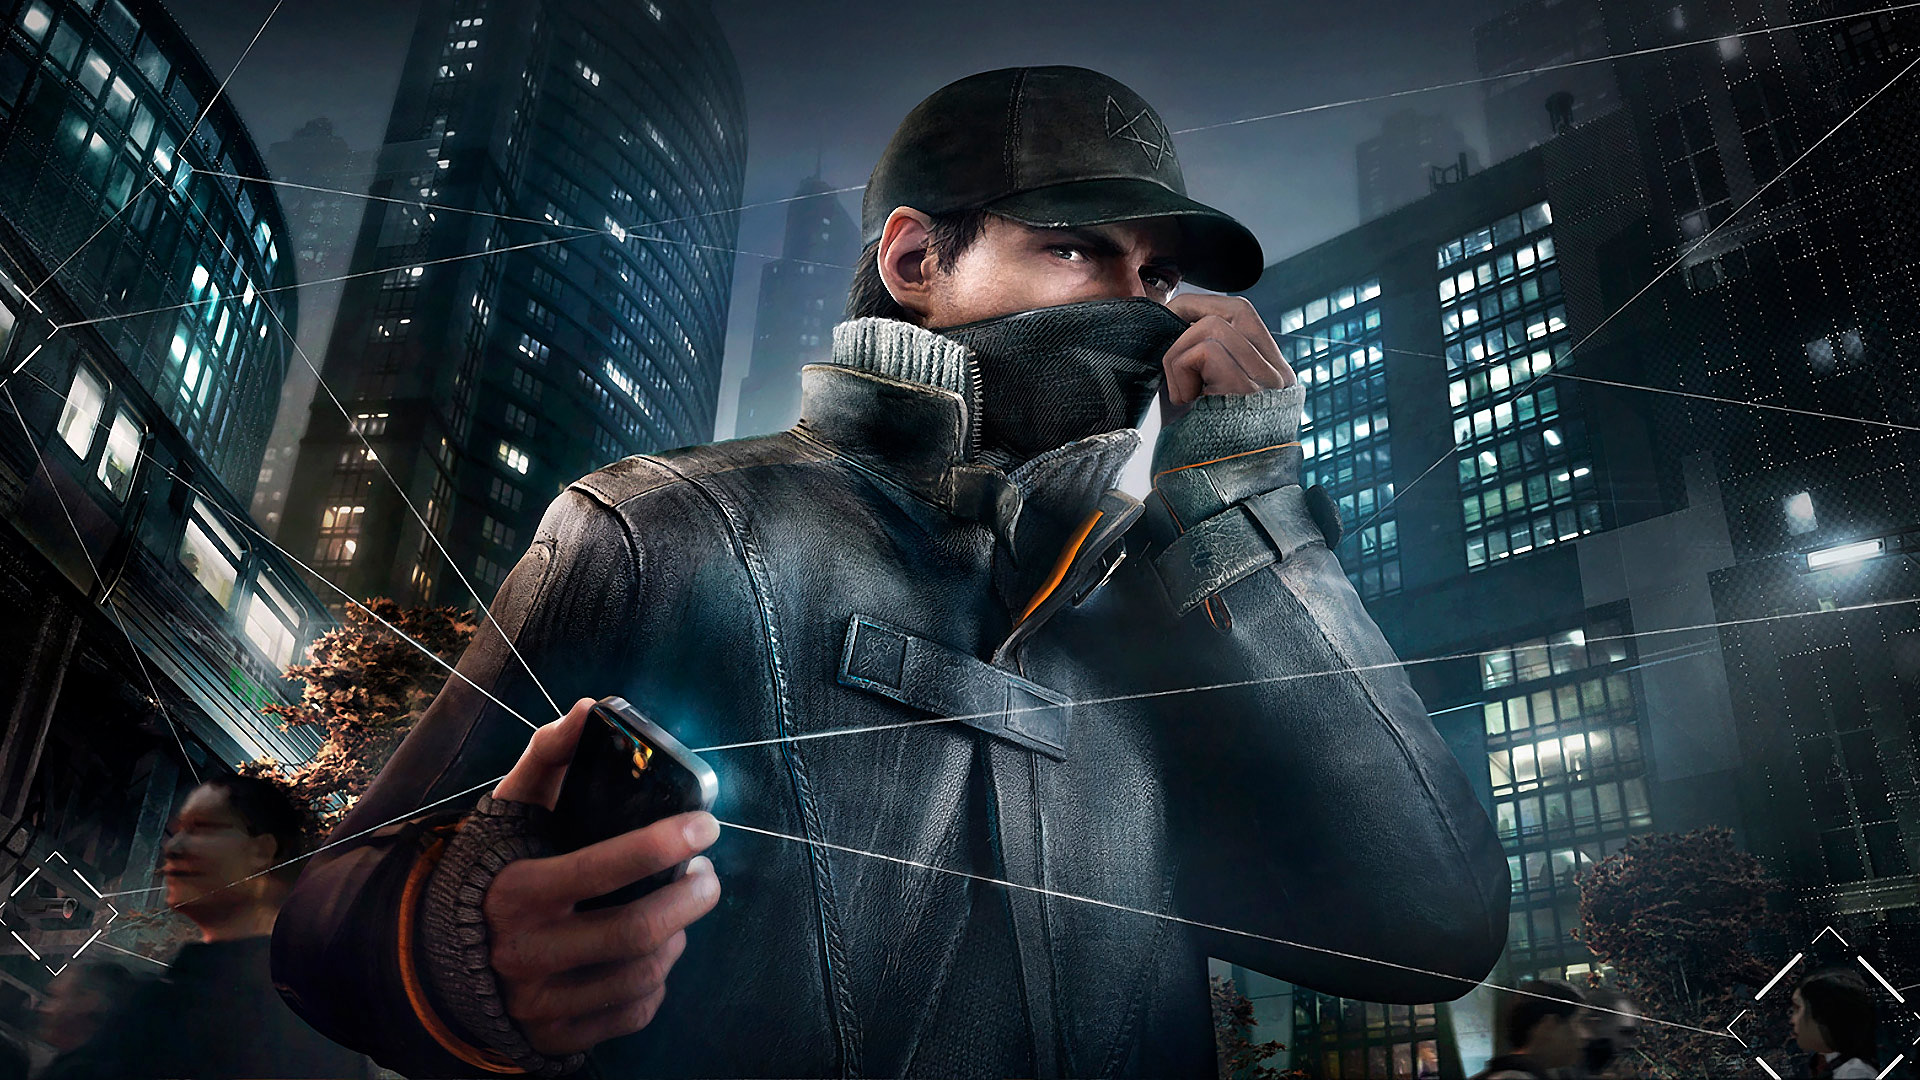 watch dogs pc game